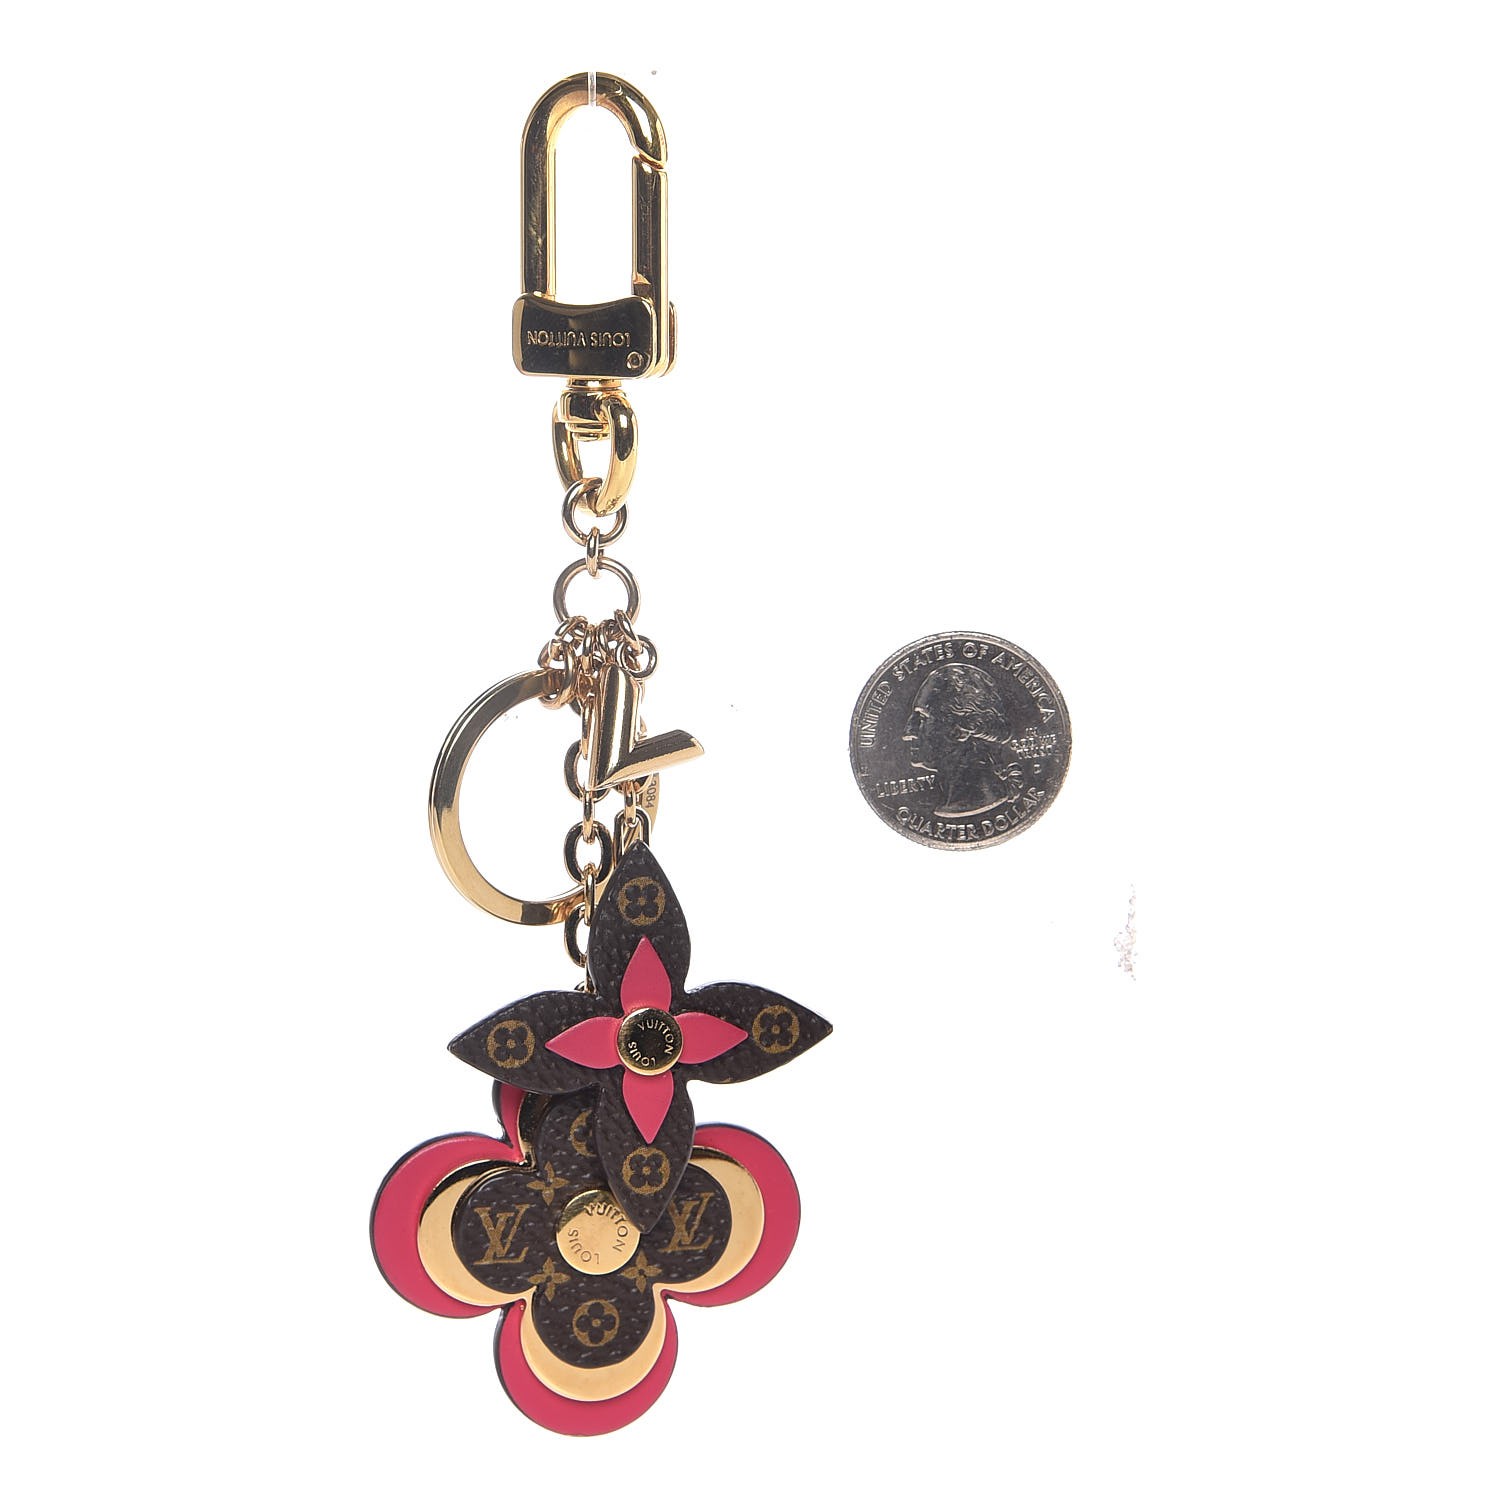 Louis Vuitton Monogram Blooming Flowers Bb Bag Charm and Key Holder